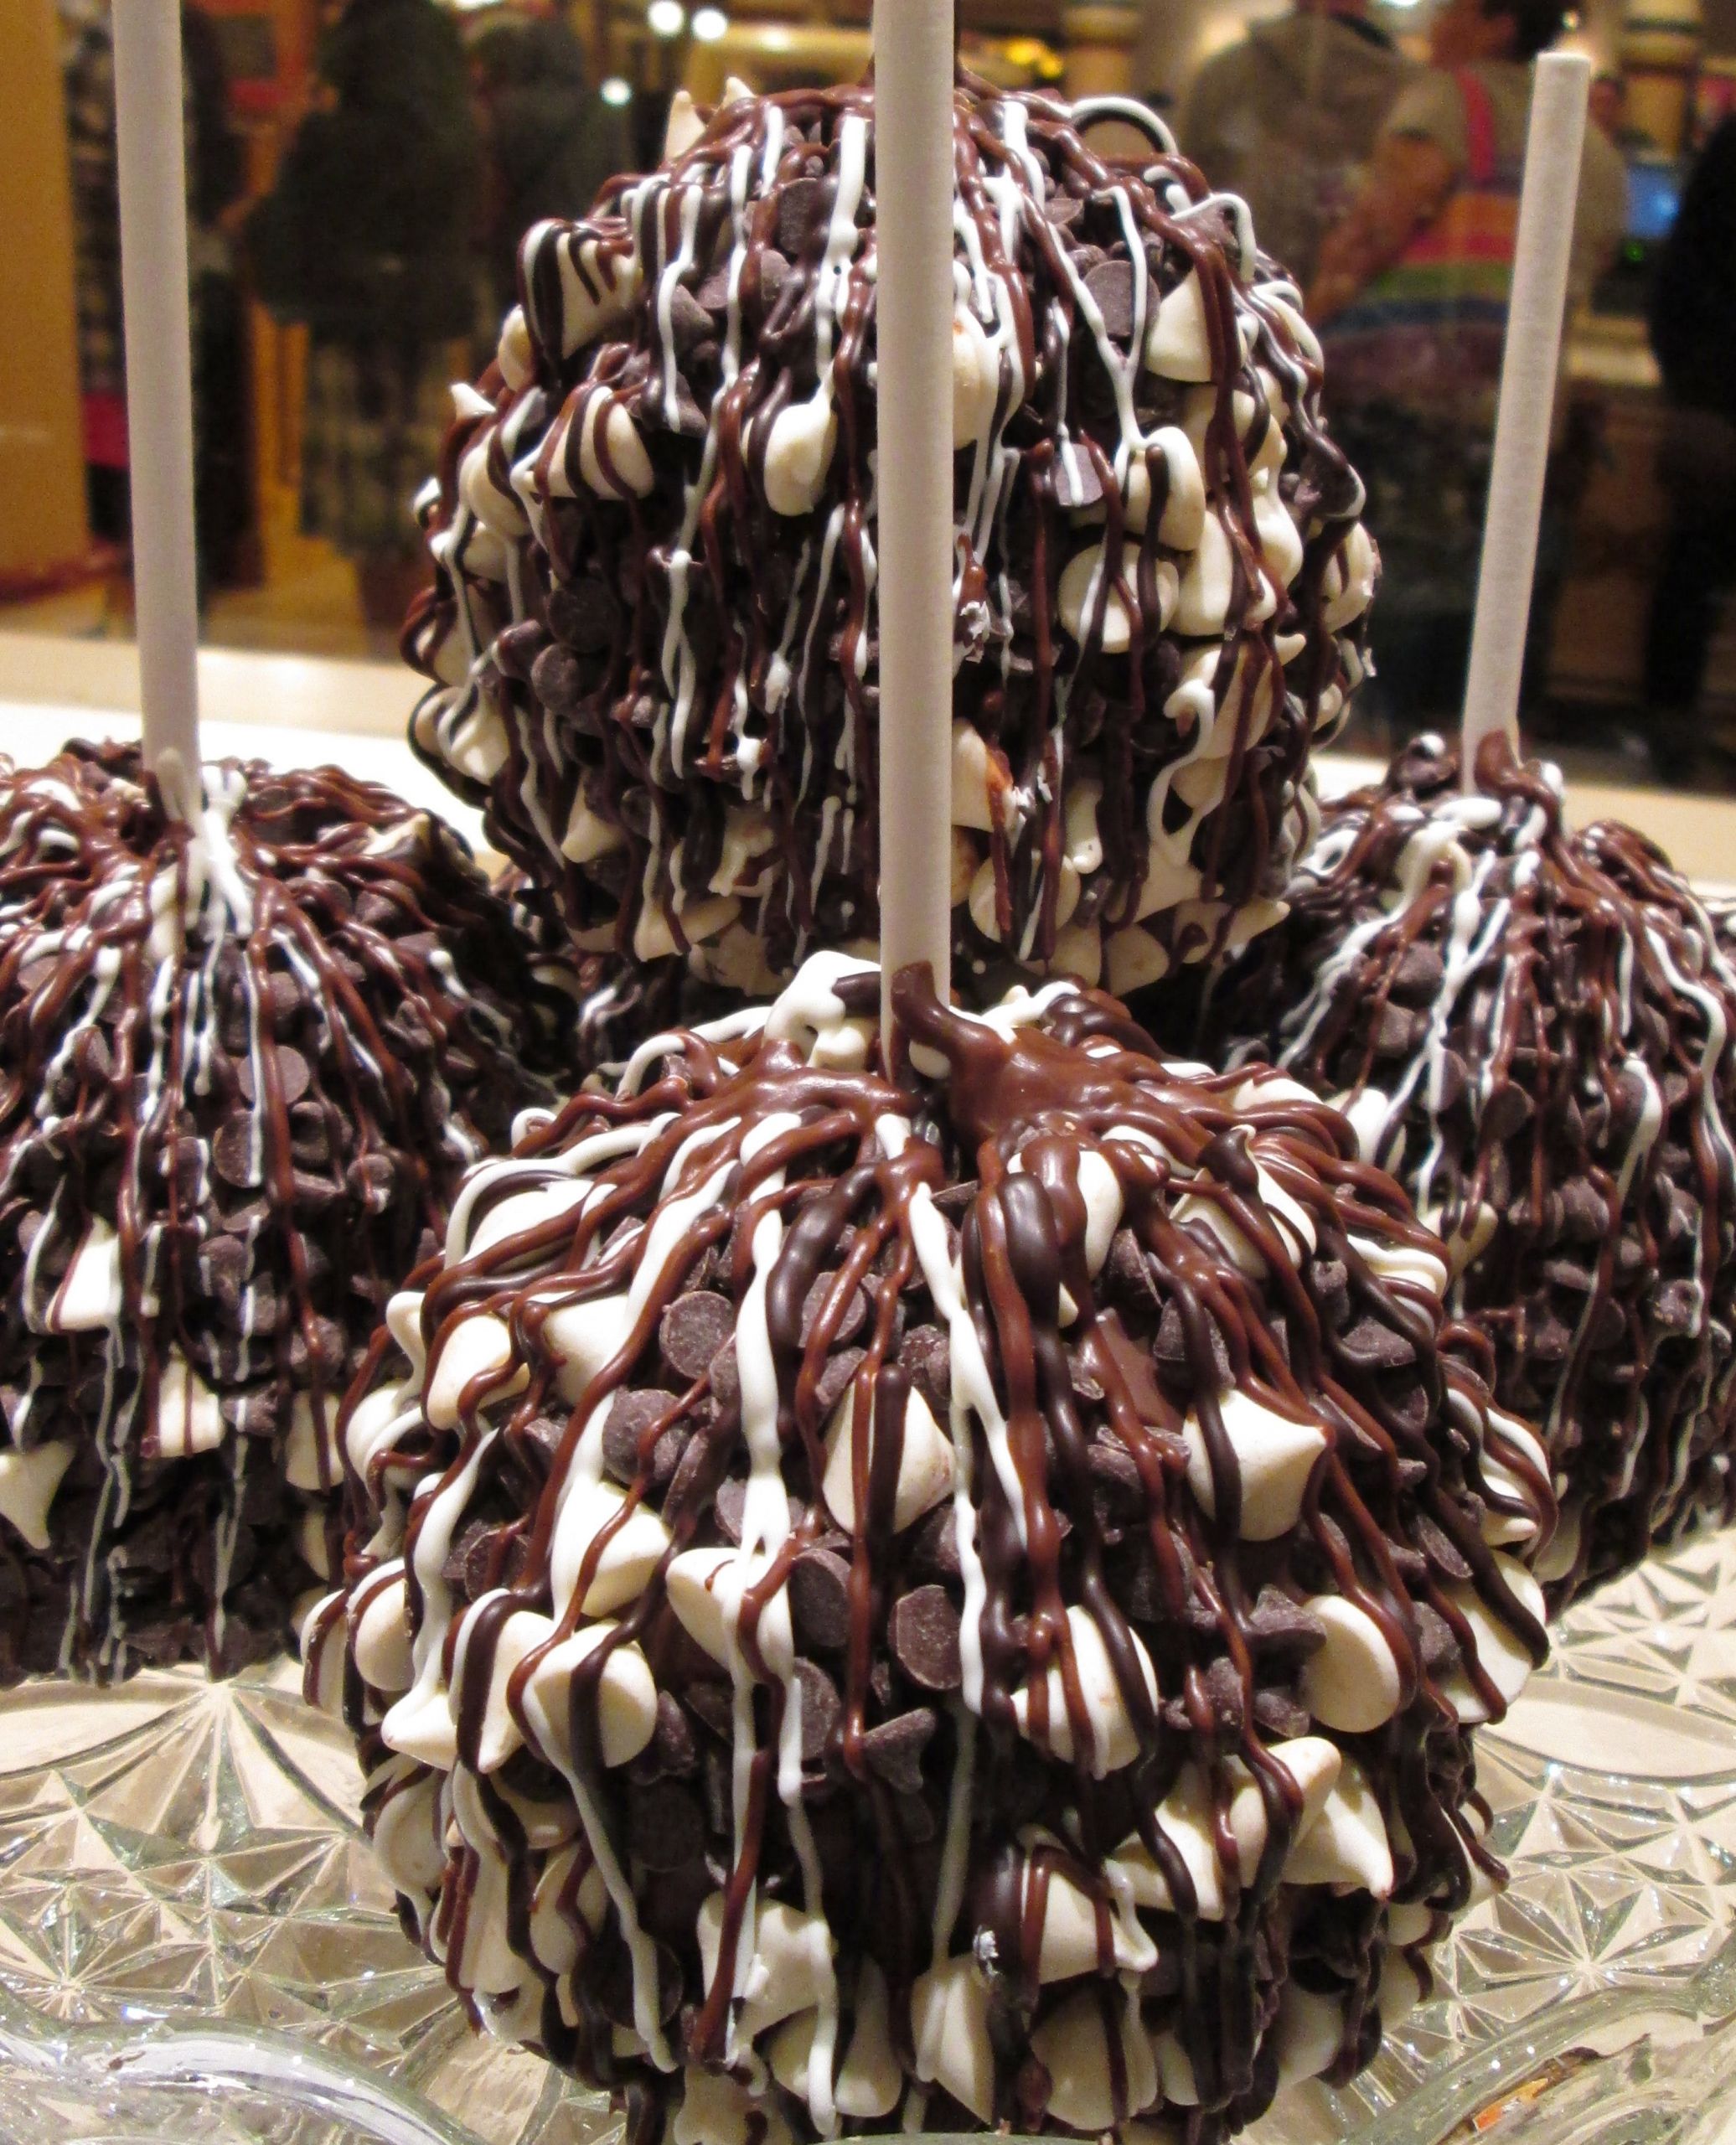 Gourmet Chocolate Caramel Apples
 March’s Gourmet Apple at the Disneyland Resort is a